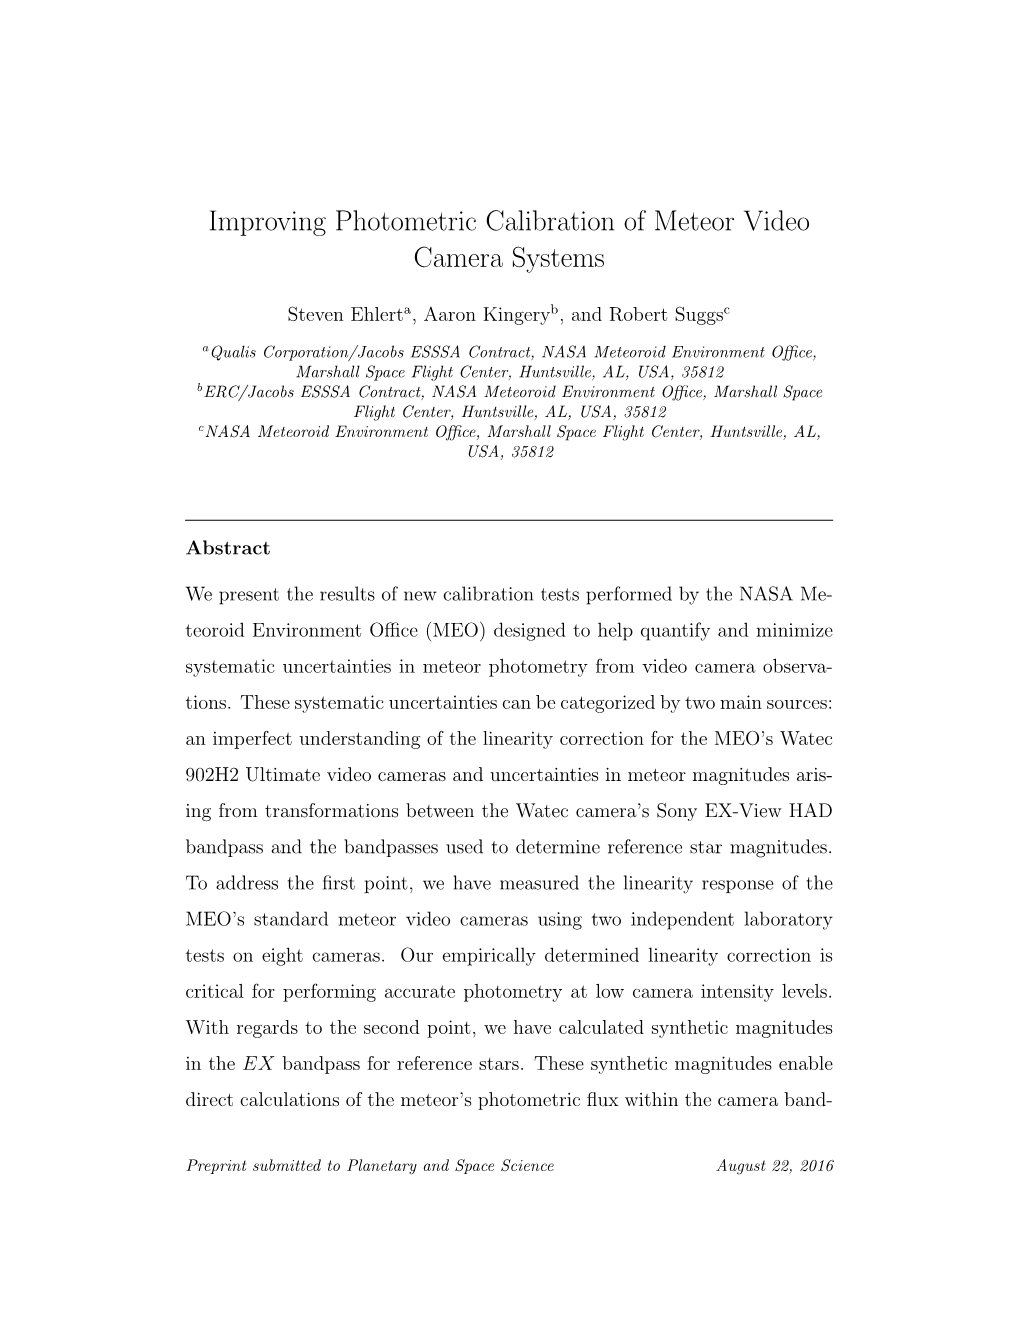 Improving Photometric Calibration of Meteor Video Camera Systems